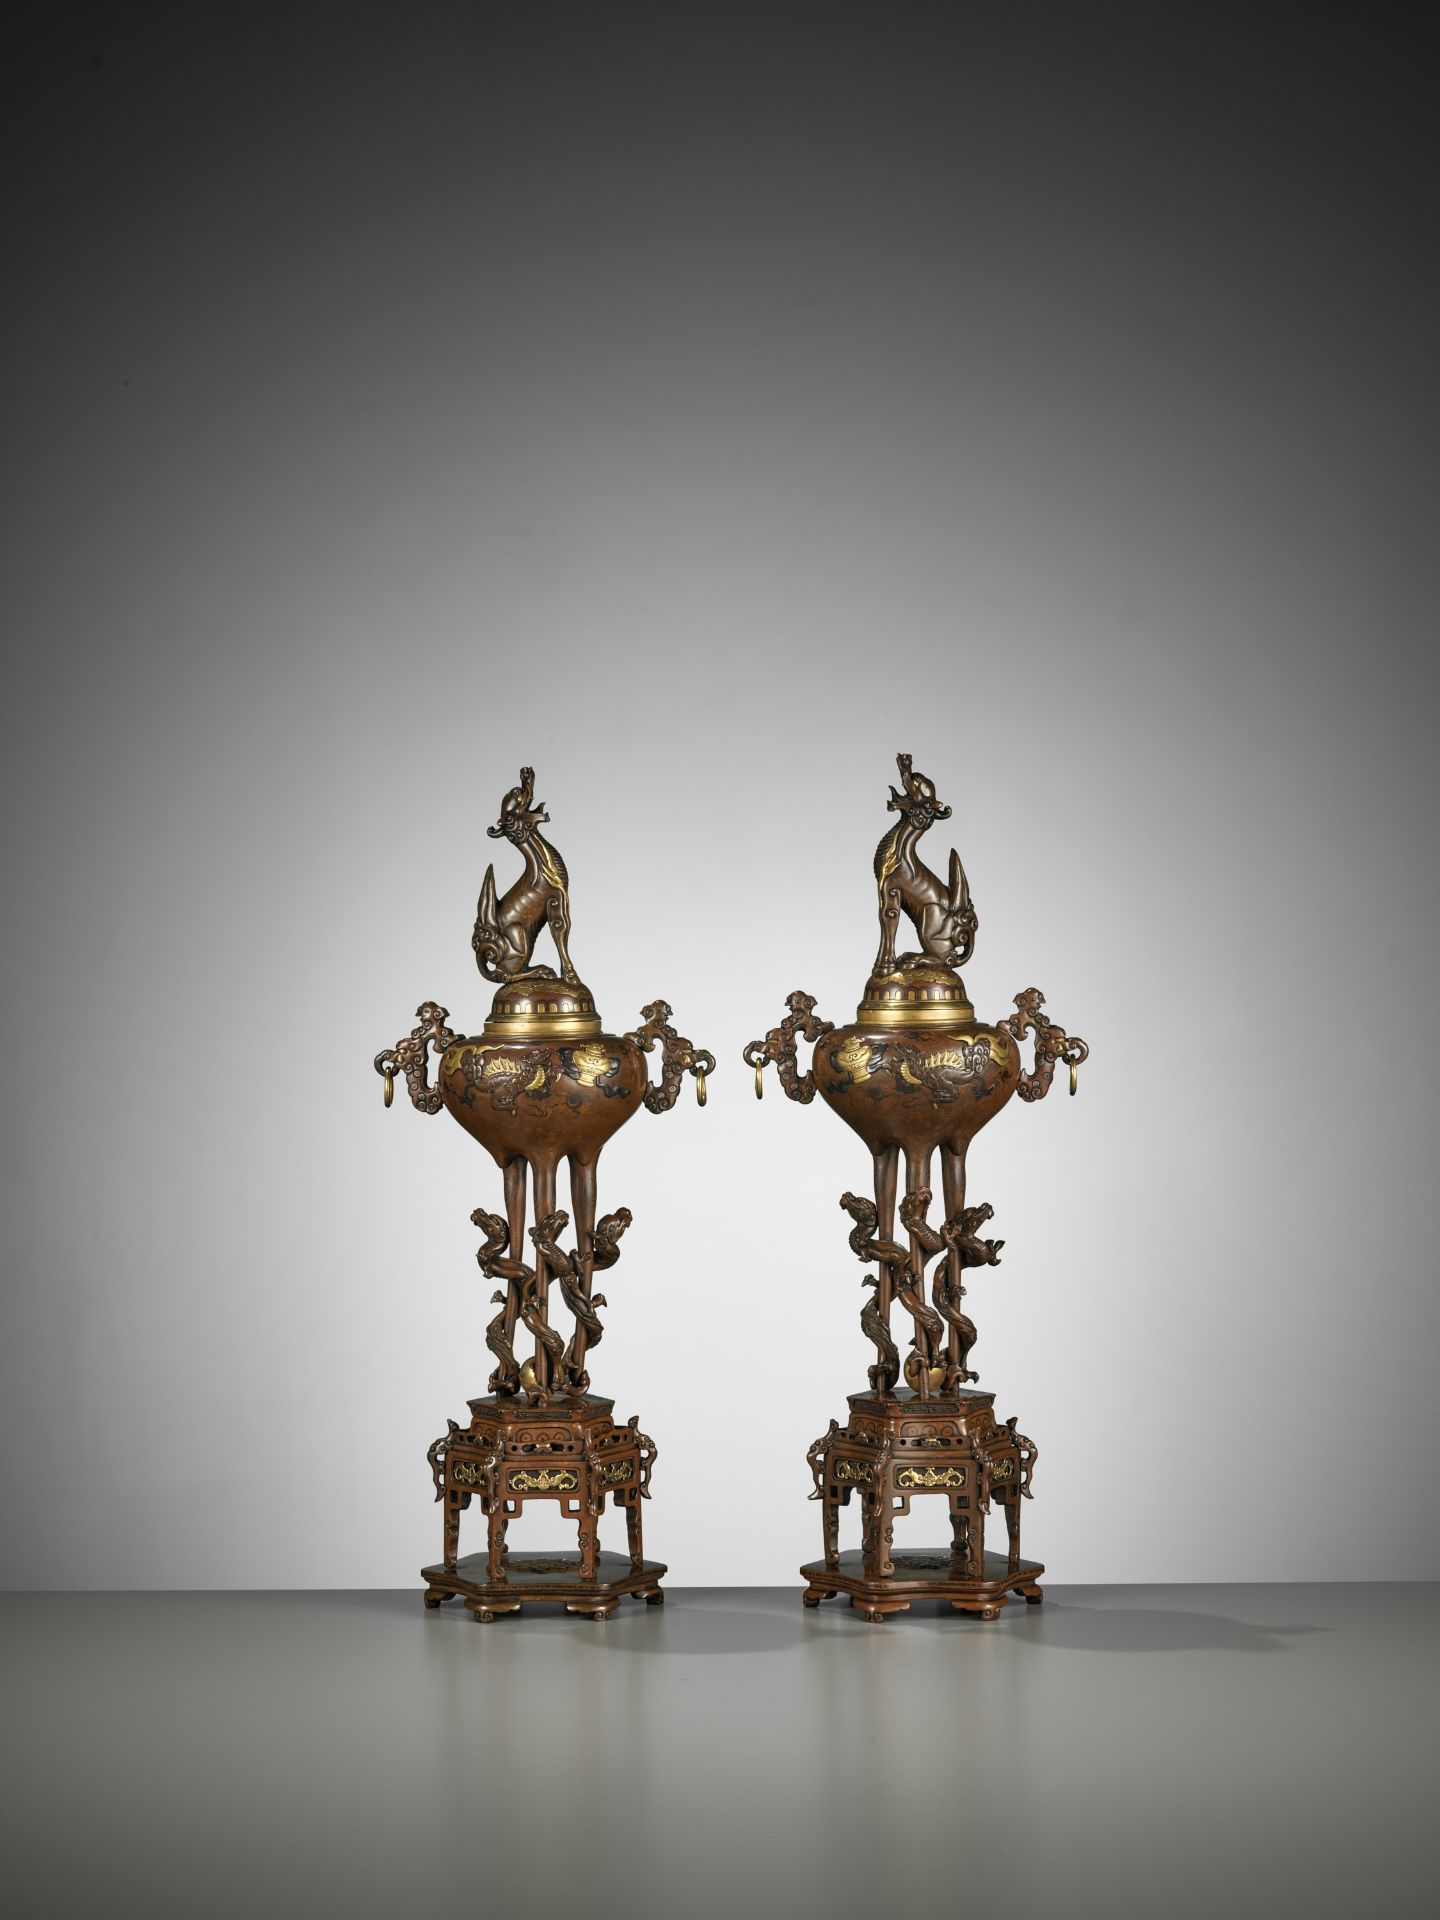 A PAIR OF SUPERB GOLD-INLAID BRONZE 'MYTHICAL BEASTS' KORO (INCENSE BURNERS) AND COVERS - Image 11 of 20